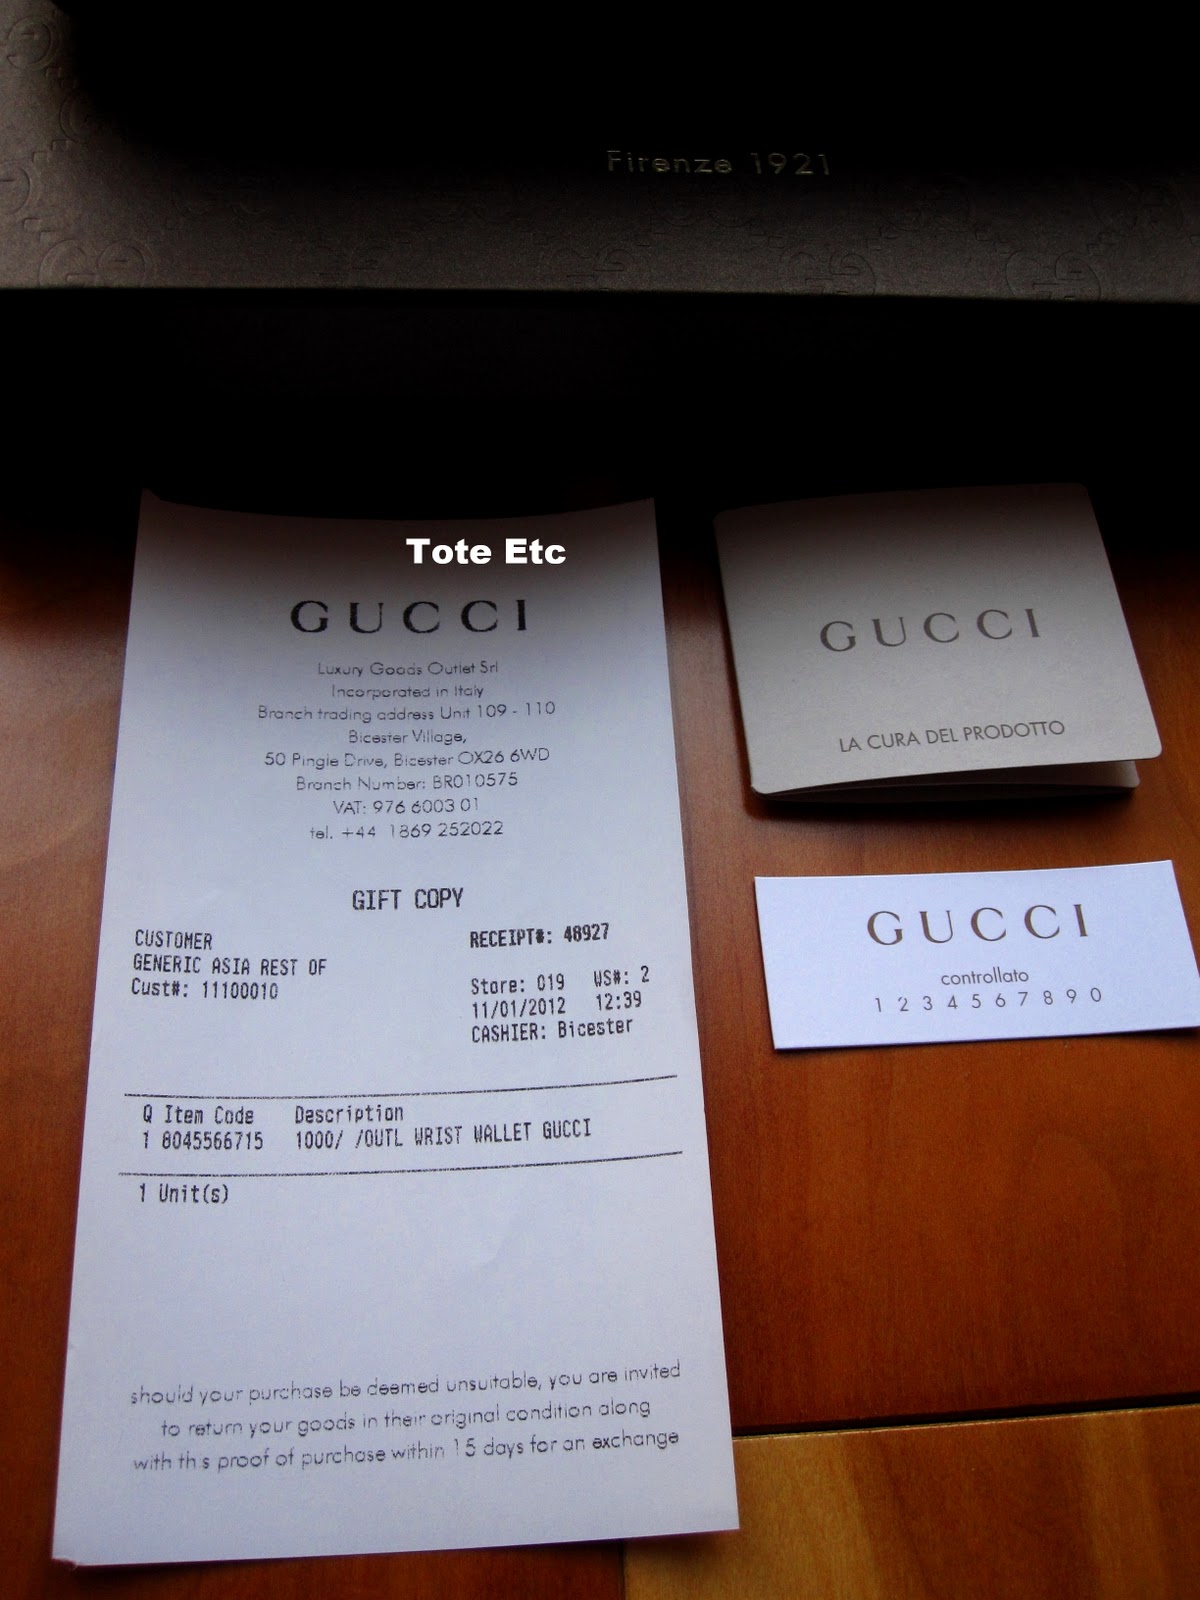 luxury goods outlet srl gucci